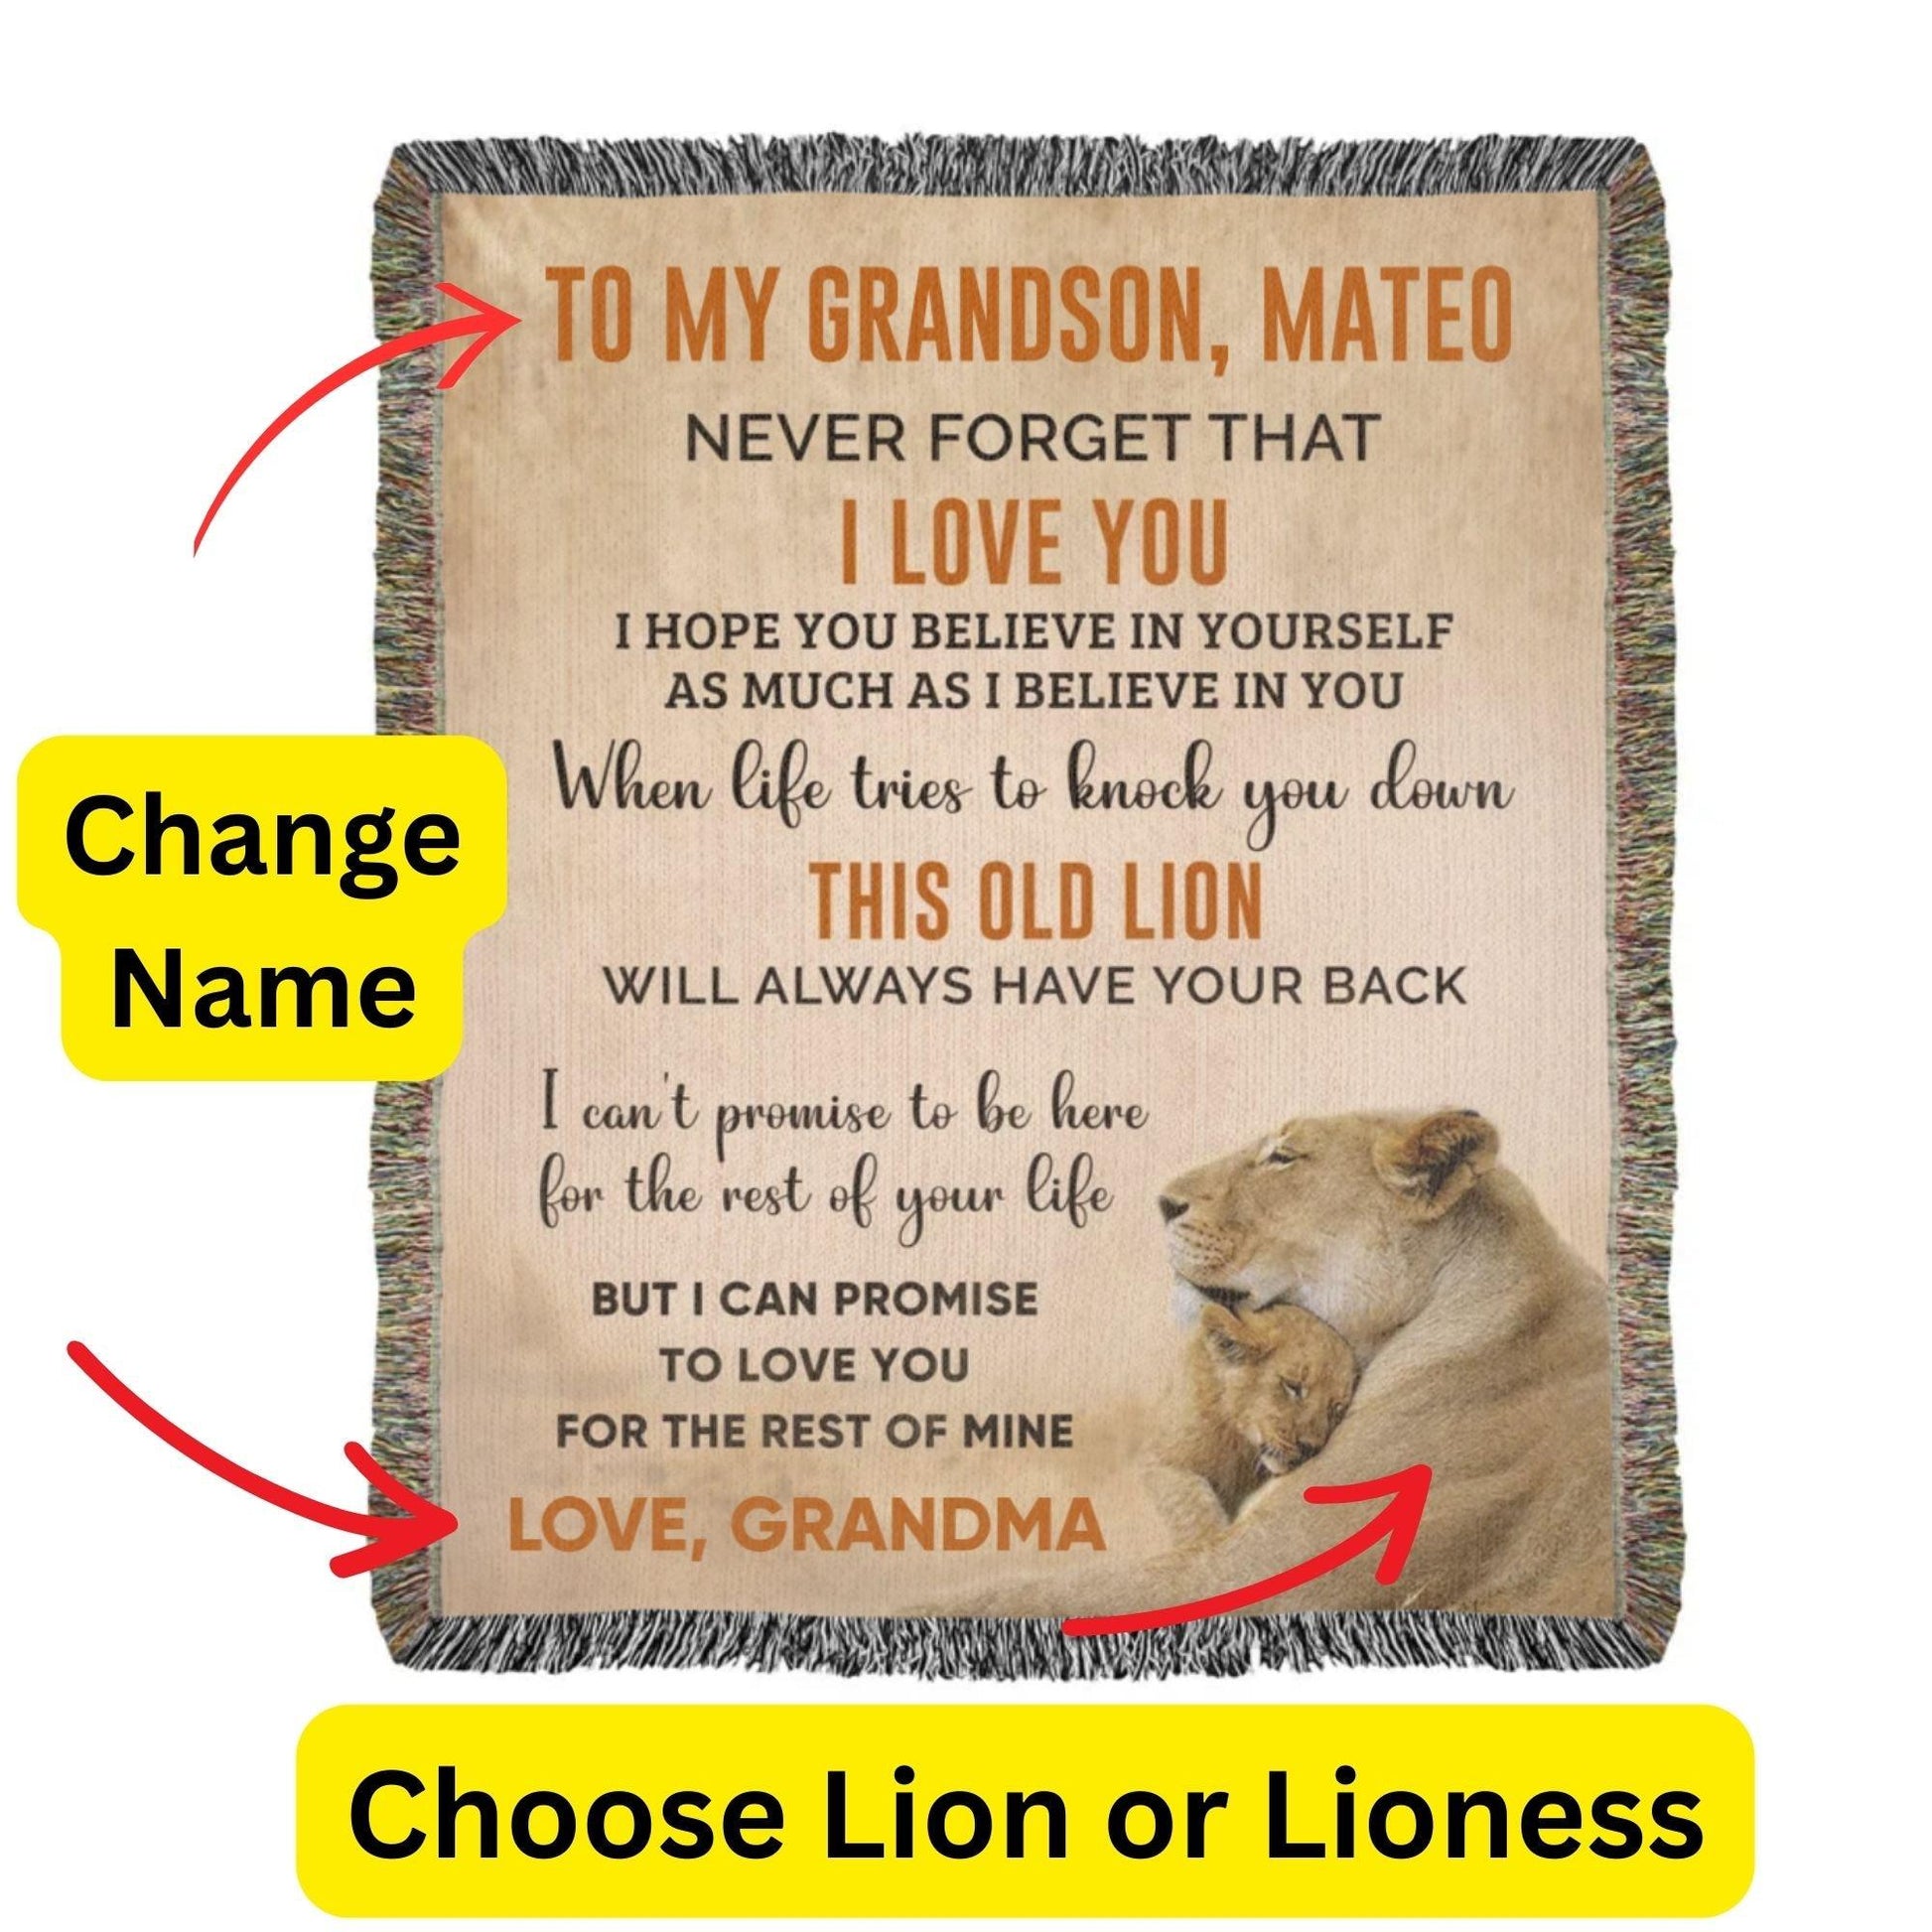 To My Grandson This Old Lion Will Always Have Your Back Personalized Heirloom Woven Blanket - Mallard Moon Gift Shop